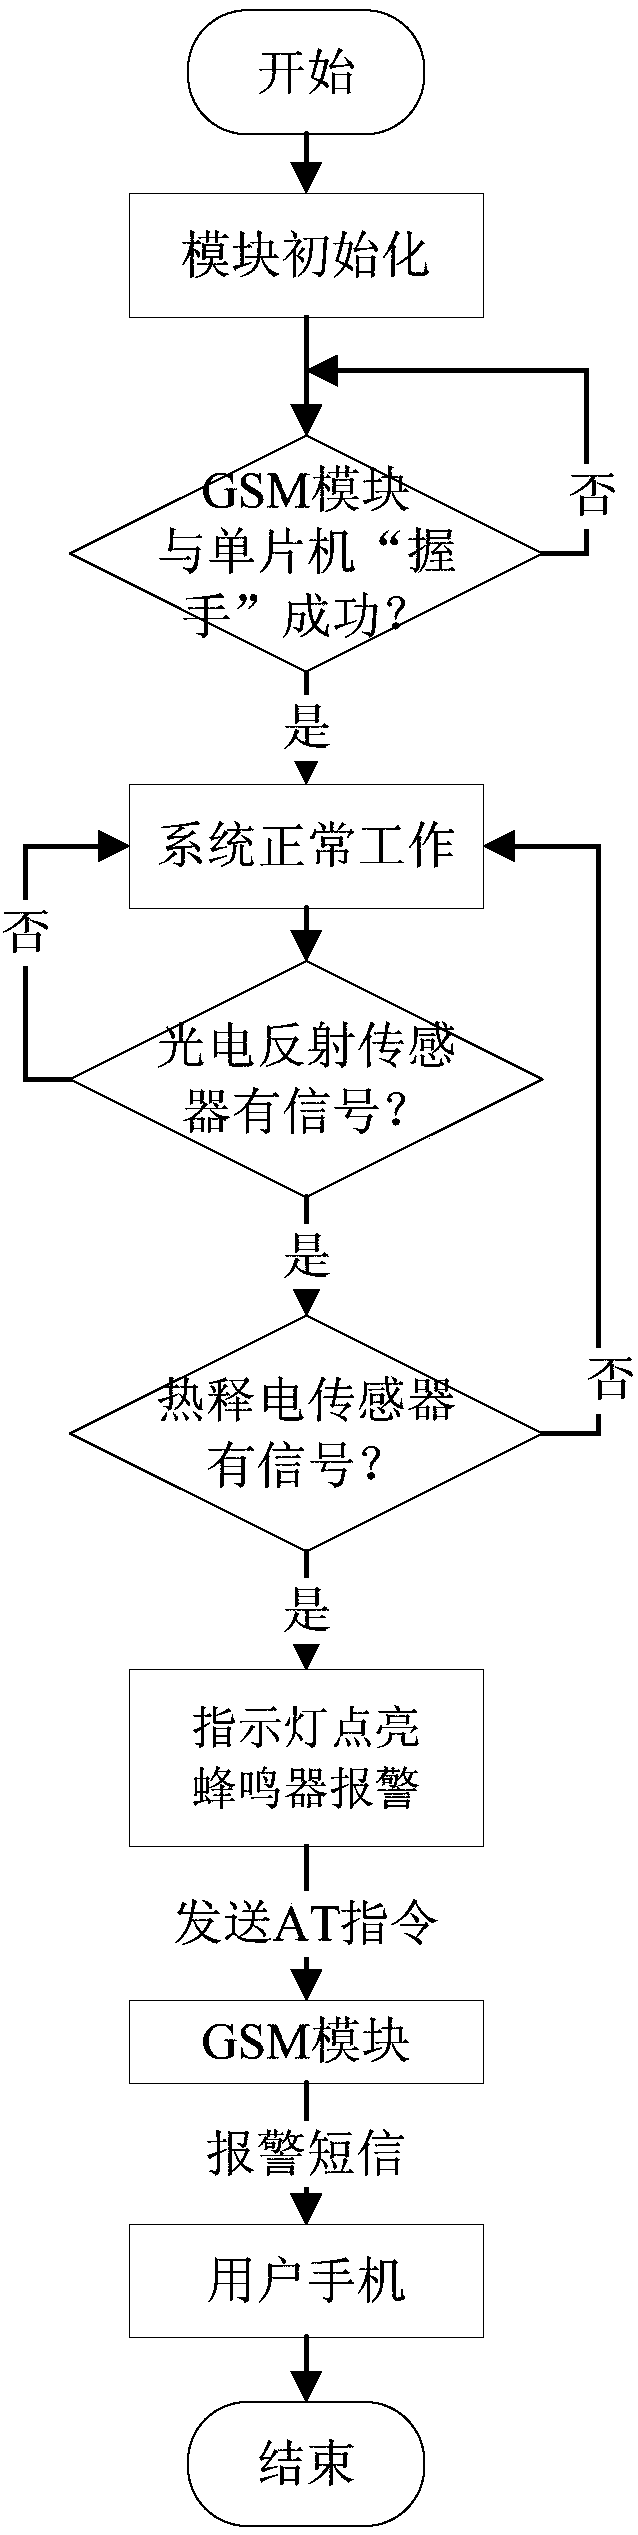 Embedded family anti-theft alarm system and working method thereof